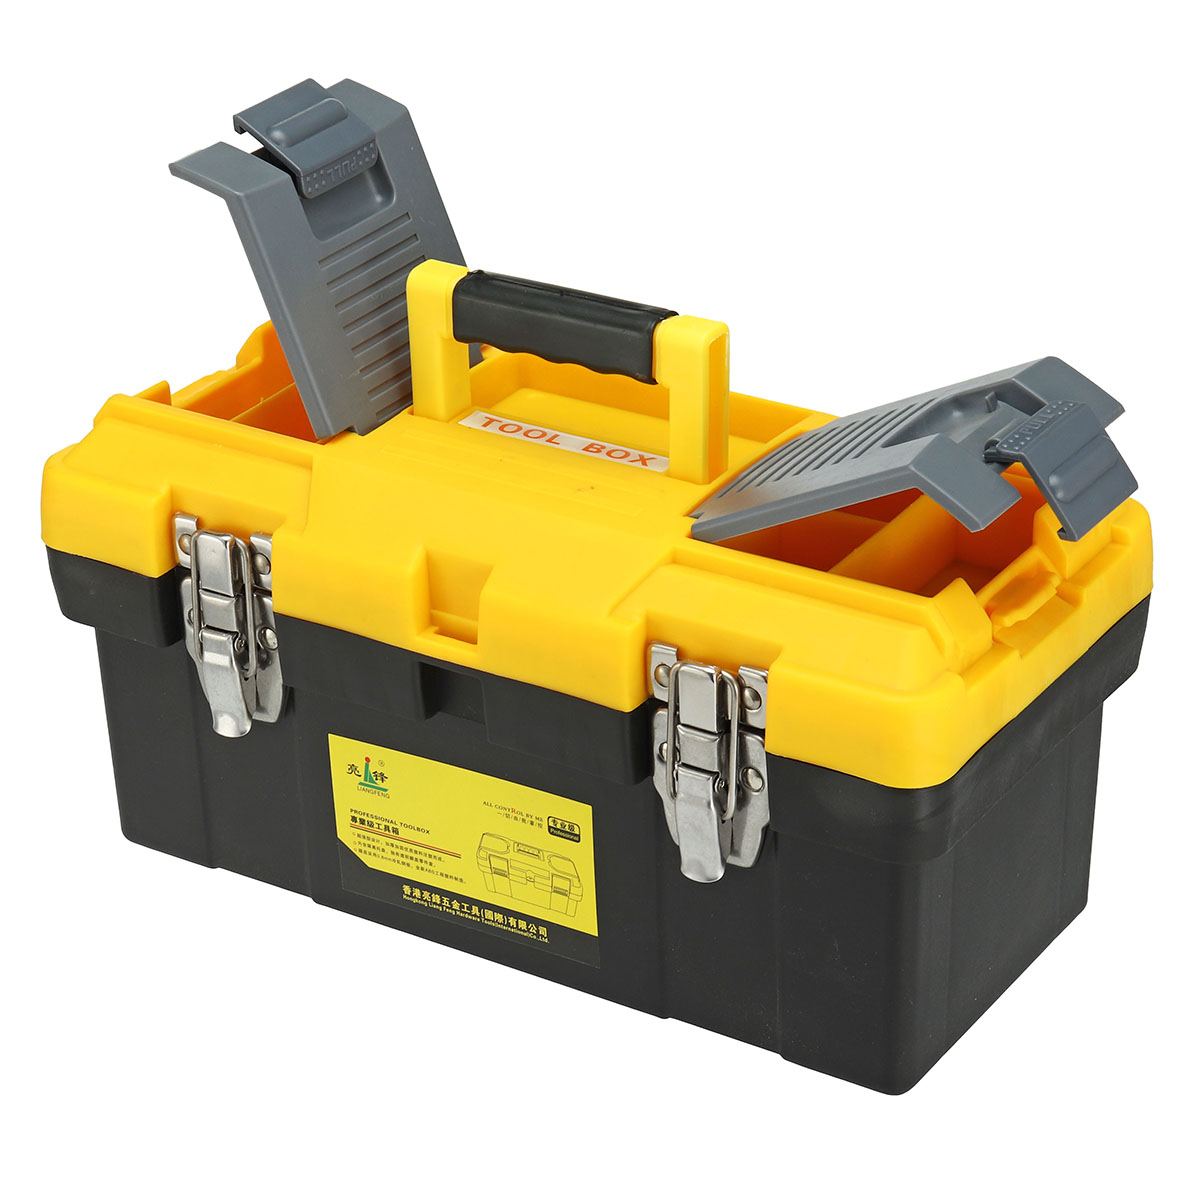 141719-Inch-Plastic-Work-Tools-Storage-Box-Protable-Carrying-Case-Handle-Accessories-Holder-1321332-9